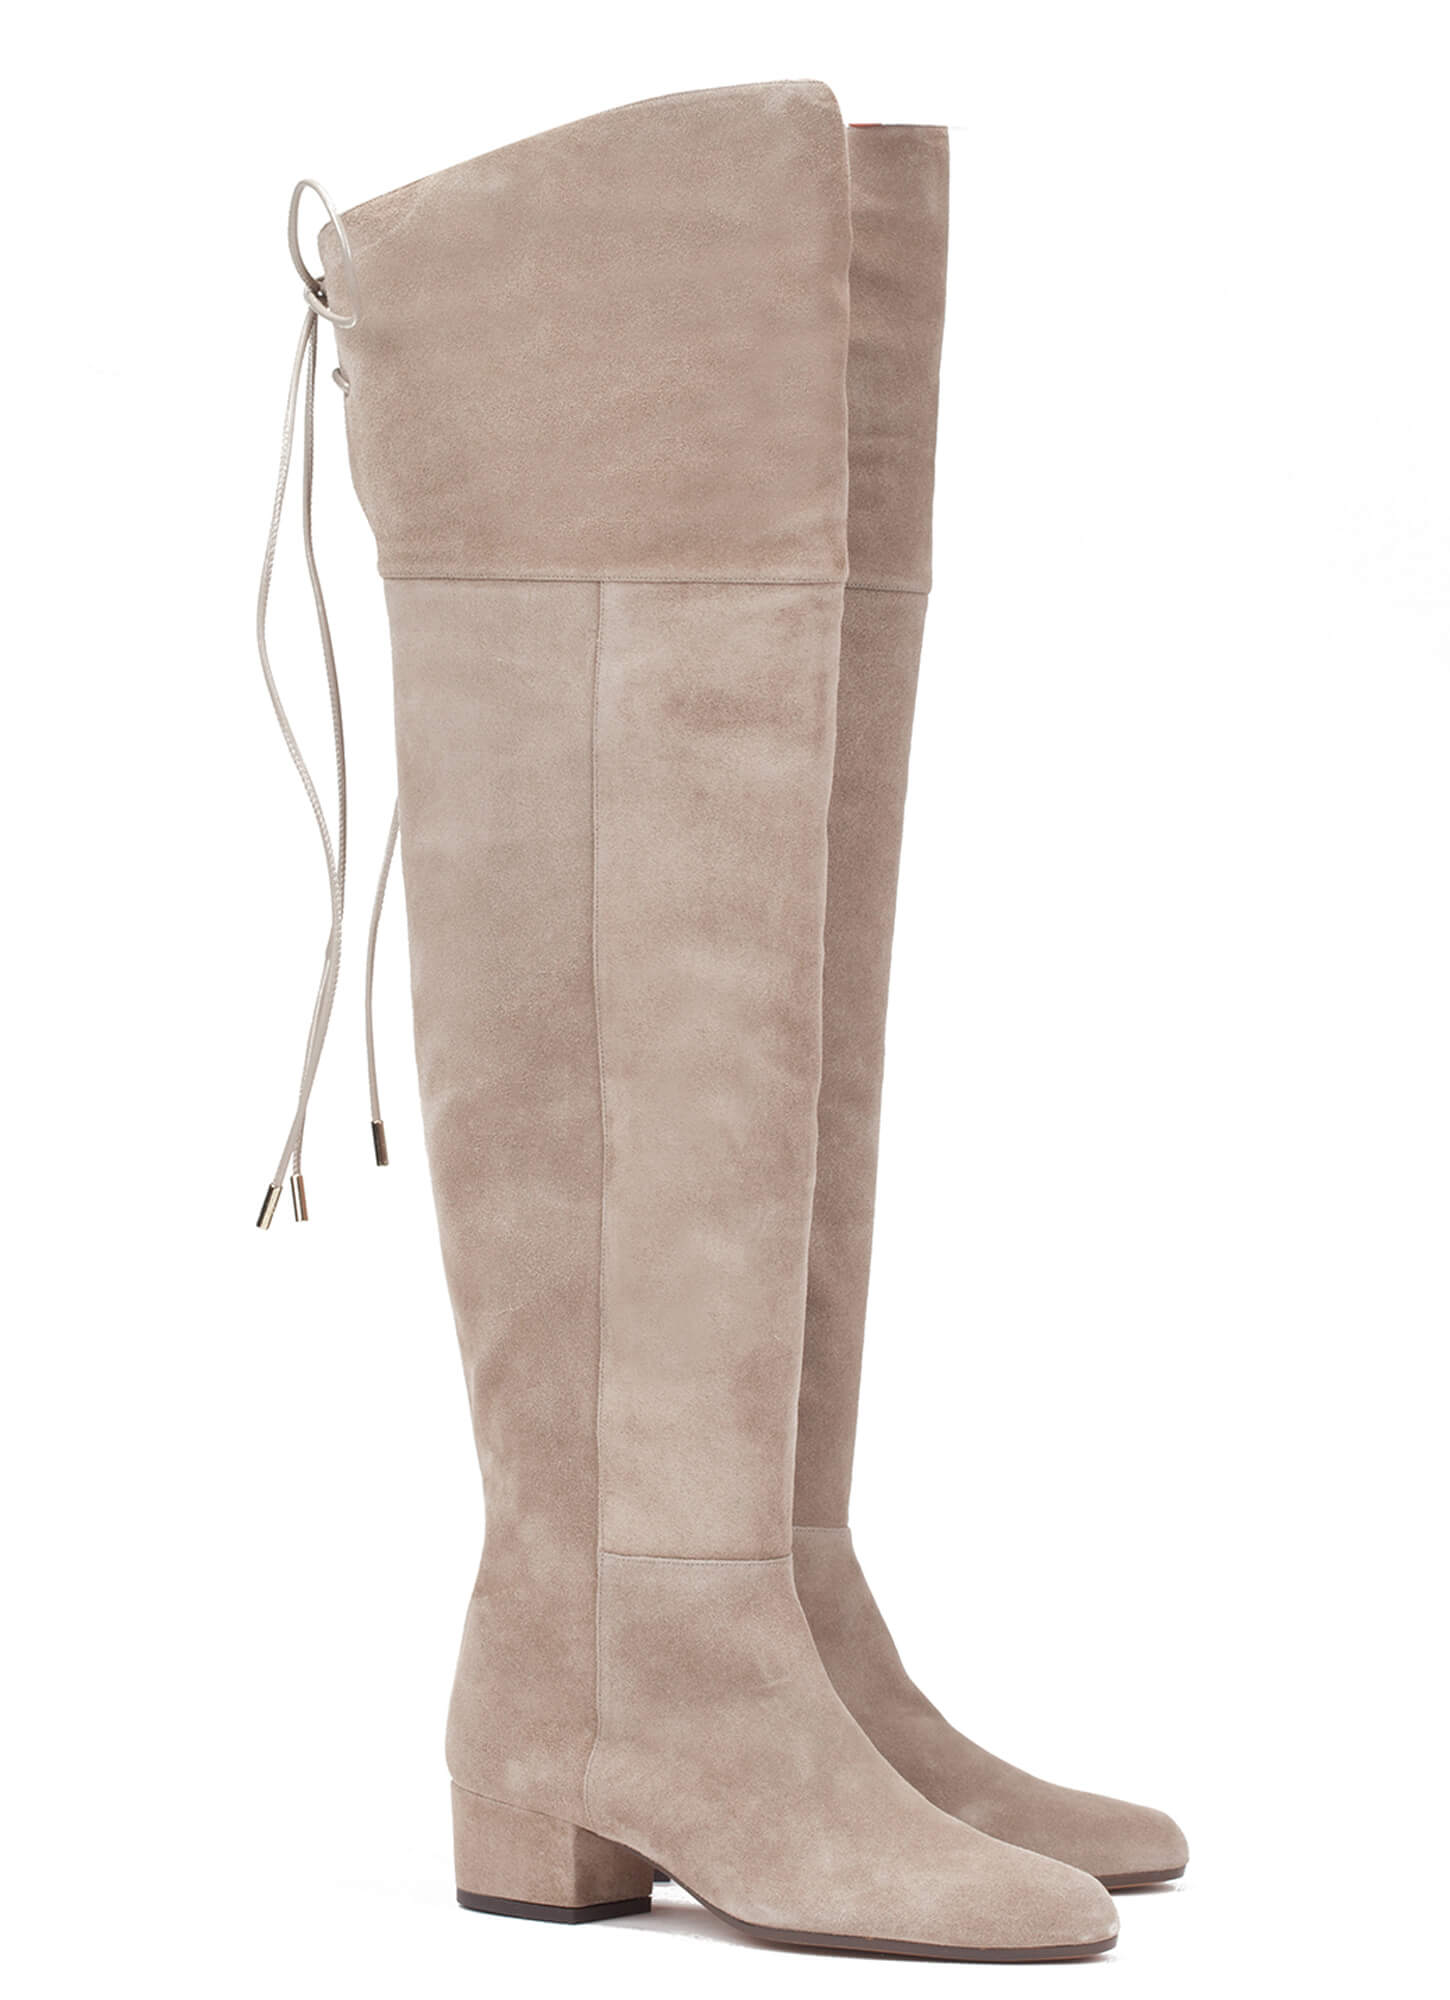 taupe suede boots